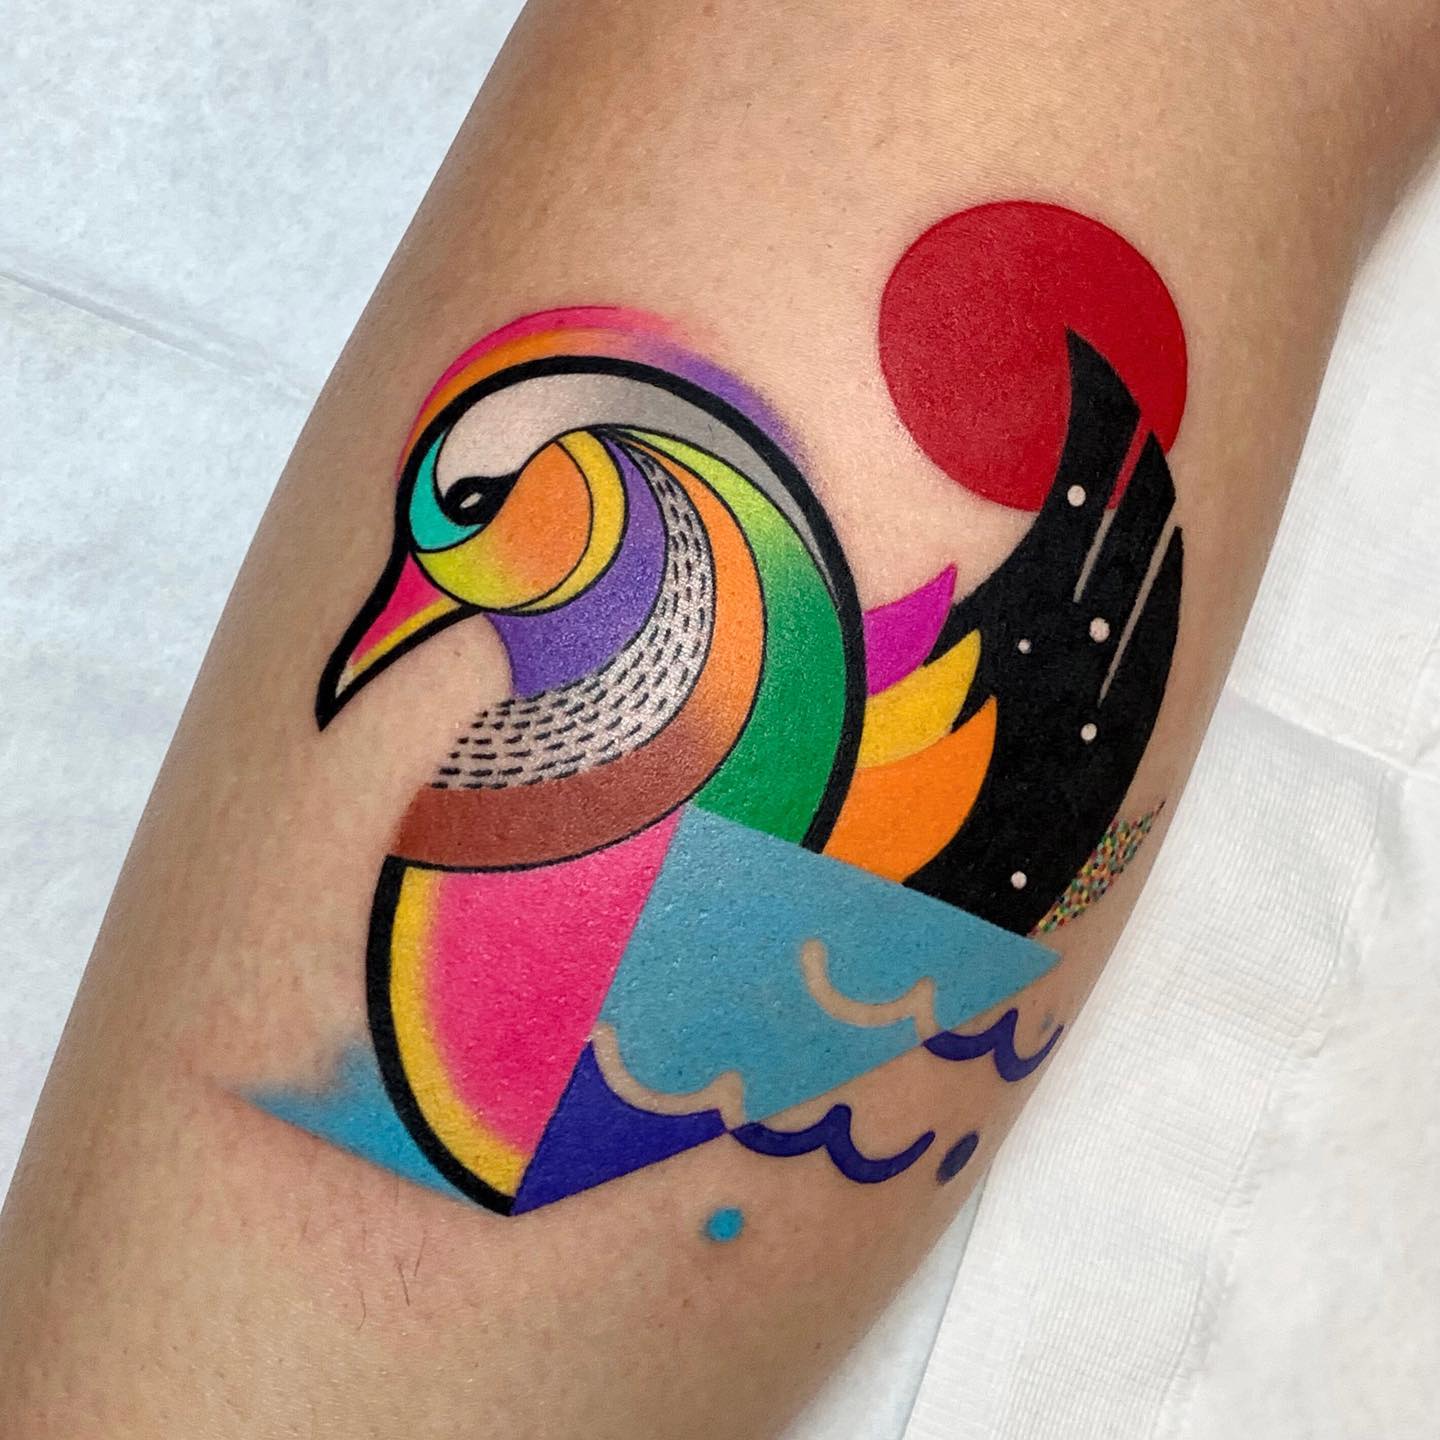 Perfectly Drawn Tattoos Look Like Stickers Placed on the Skin